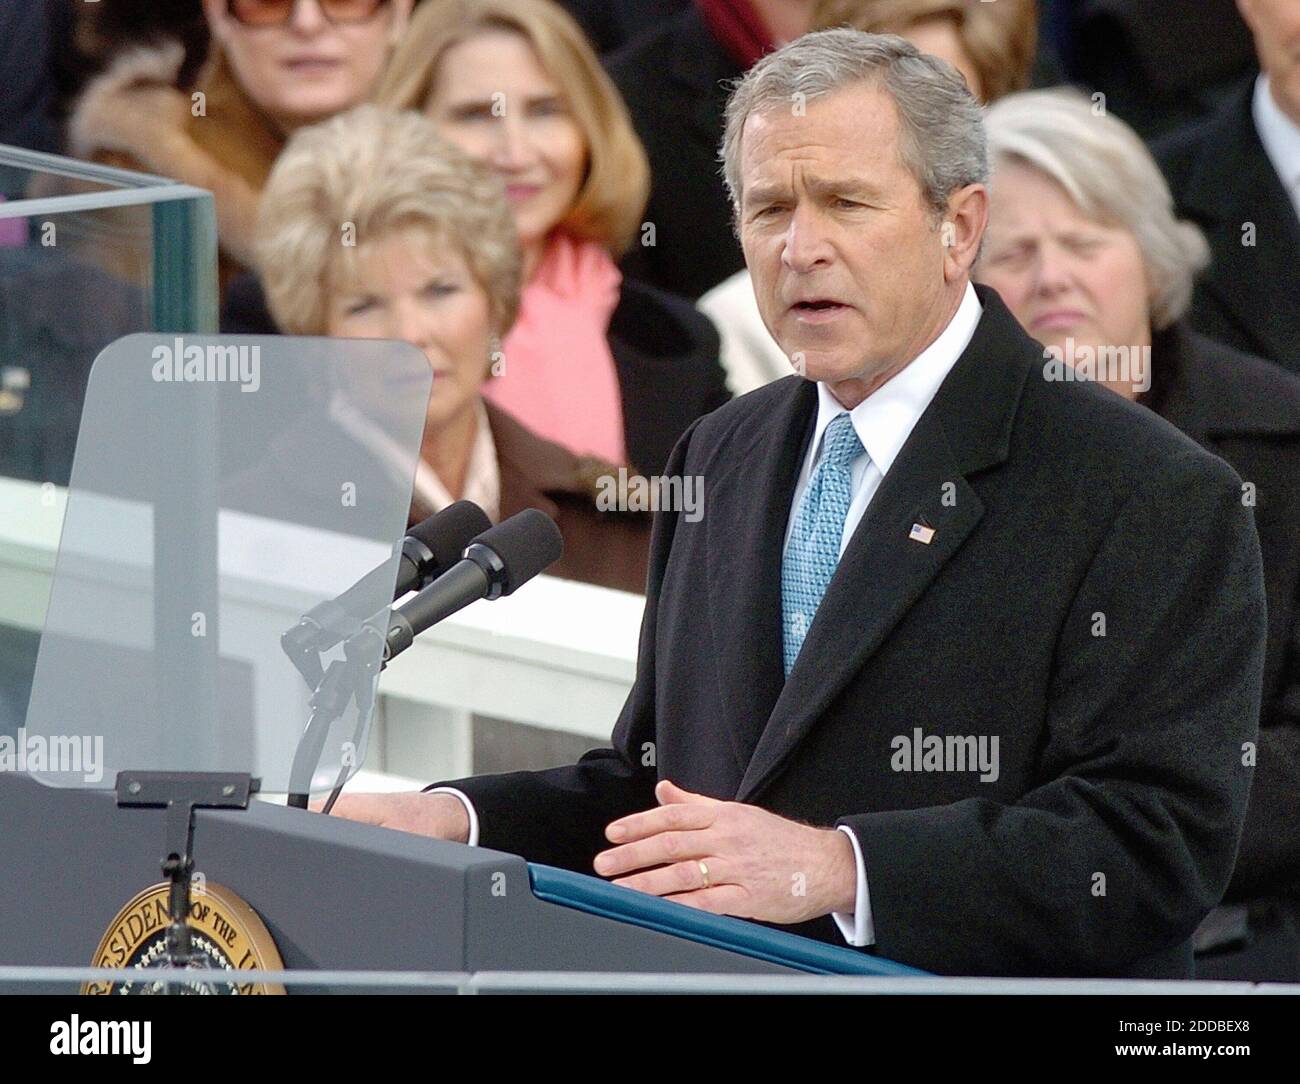 NO FILM, NO VIDEO, NO TV, NO DOCUMENTARY - U.S. President George W. Bush gives his Inauguration Day speech, during the presidential Inauguration ceremony on the steps of the U.S. Capitol, in Washington, DC, USA, on January 20, 2005. Photo by George Bridges/US News Story Slugged/KRT/ABACA. Stock Photo